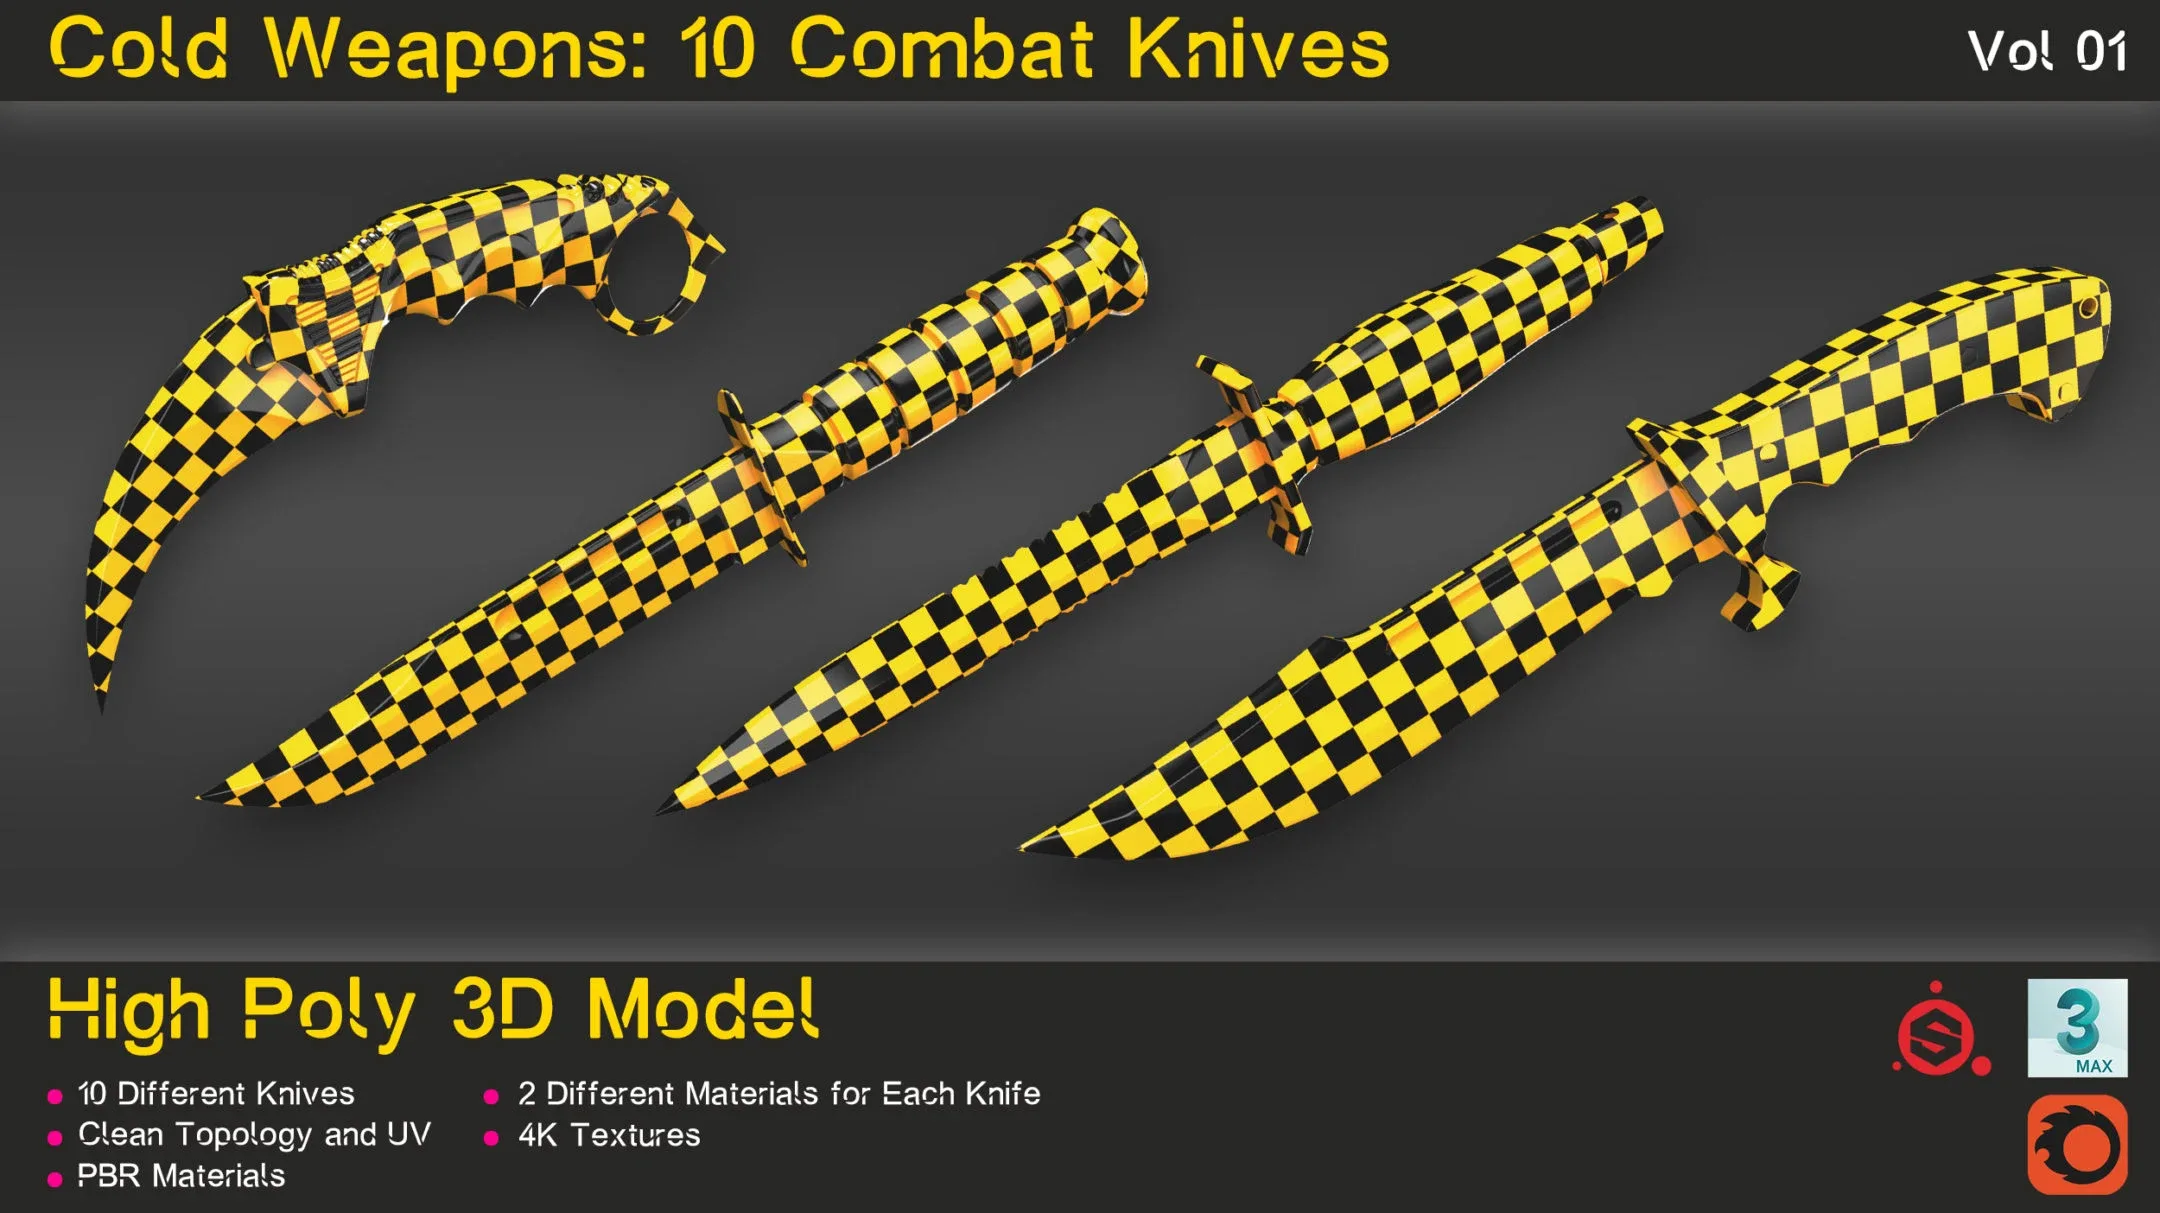 Cold Weapons: 10 Combat Knives (Vol 01)